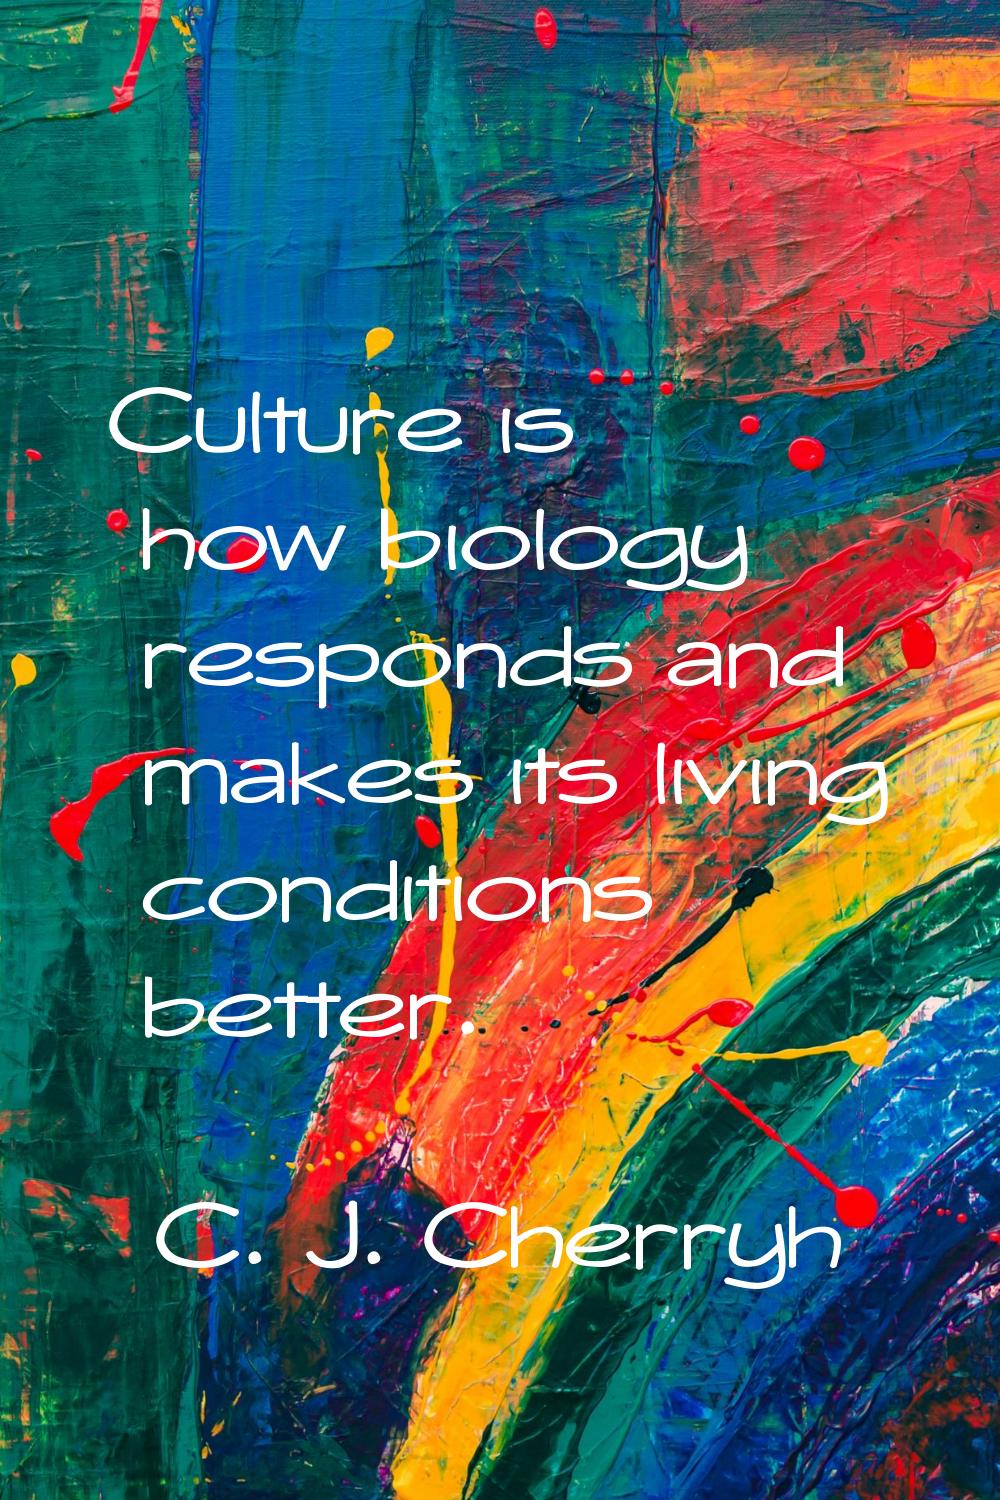 Culture is how biology responds and makes its living conditions better.